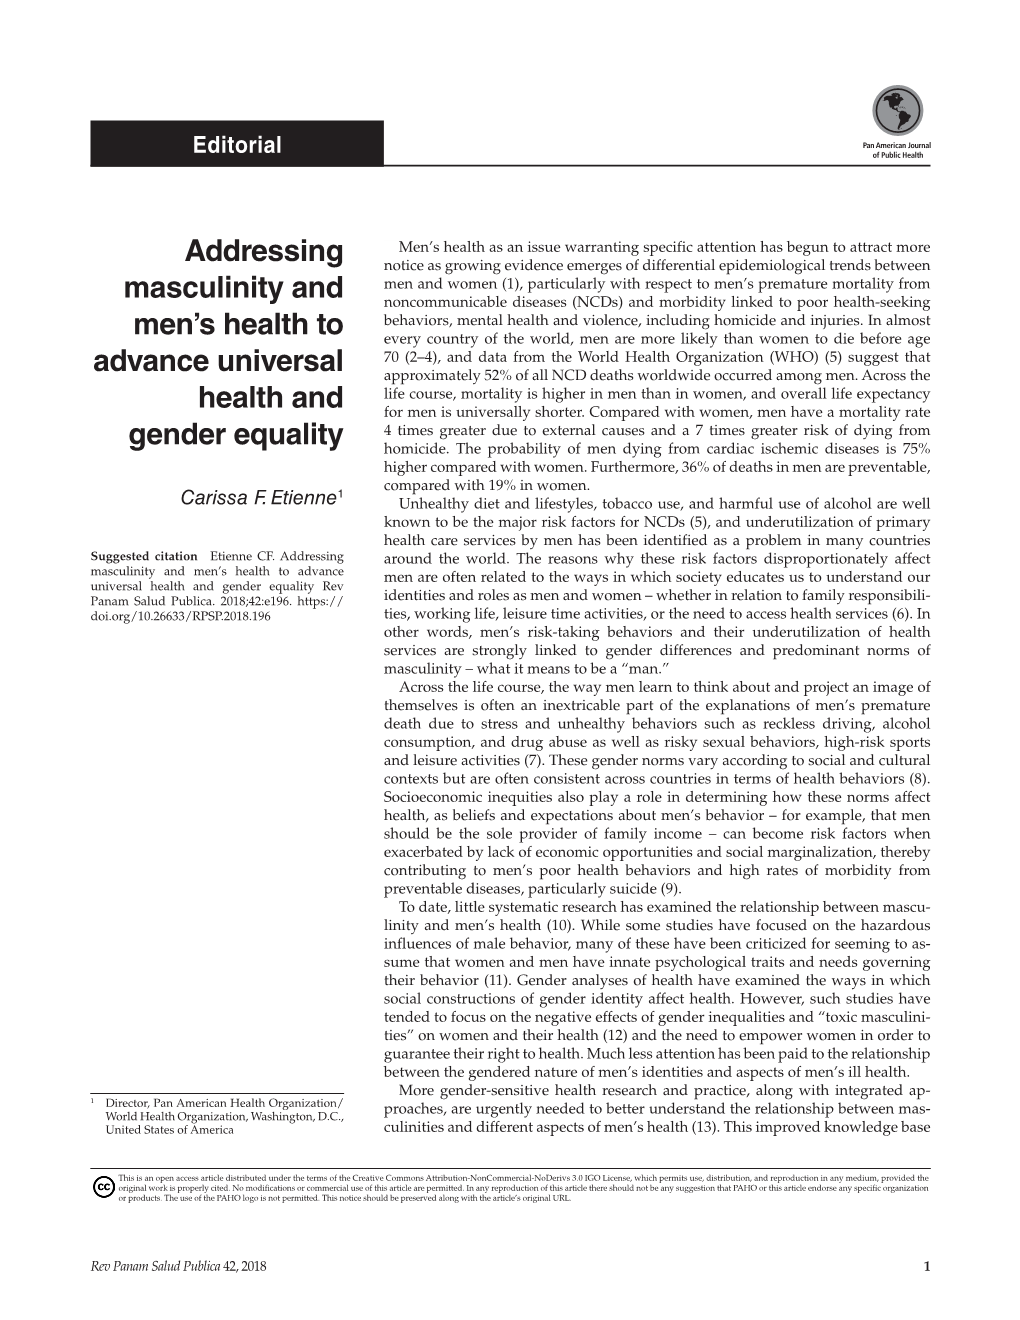 Addressing Masculinity and Men's Health to Advance Universal Health and Gender Equality